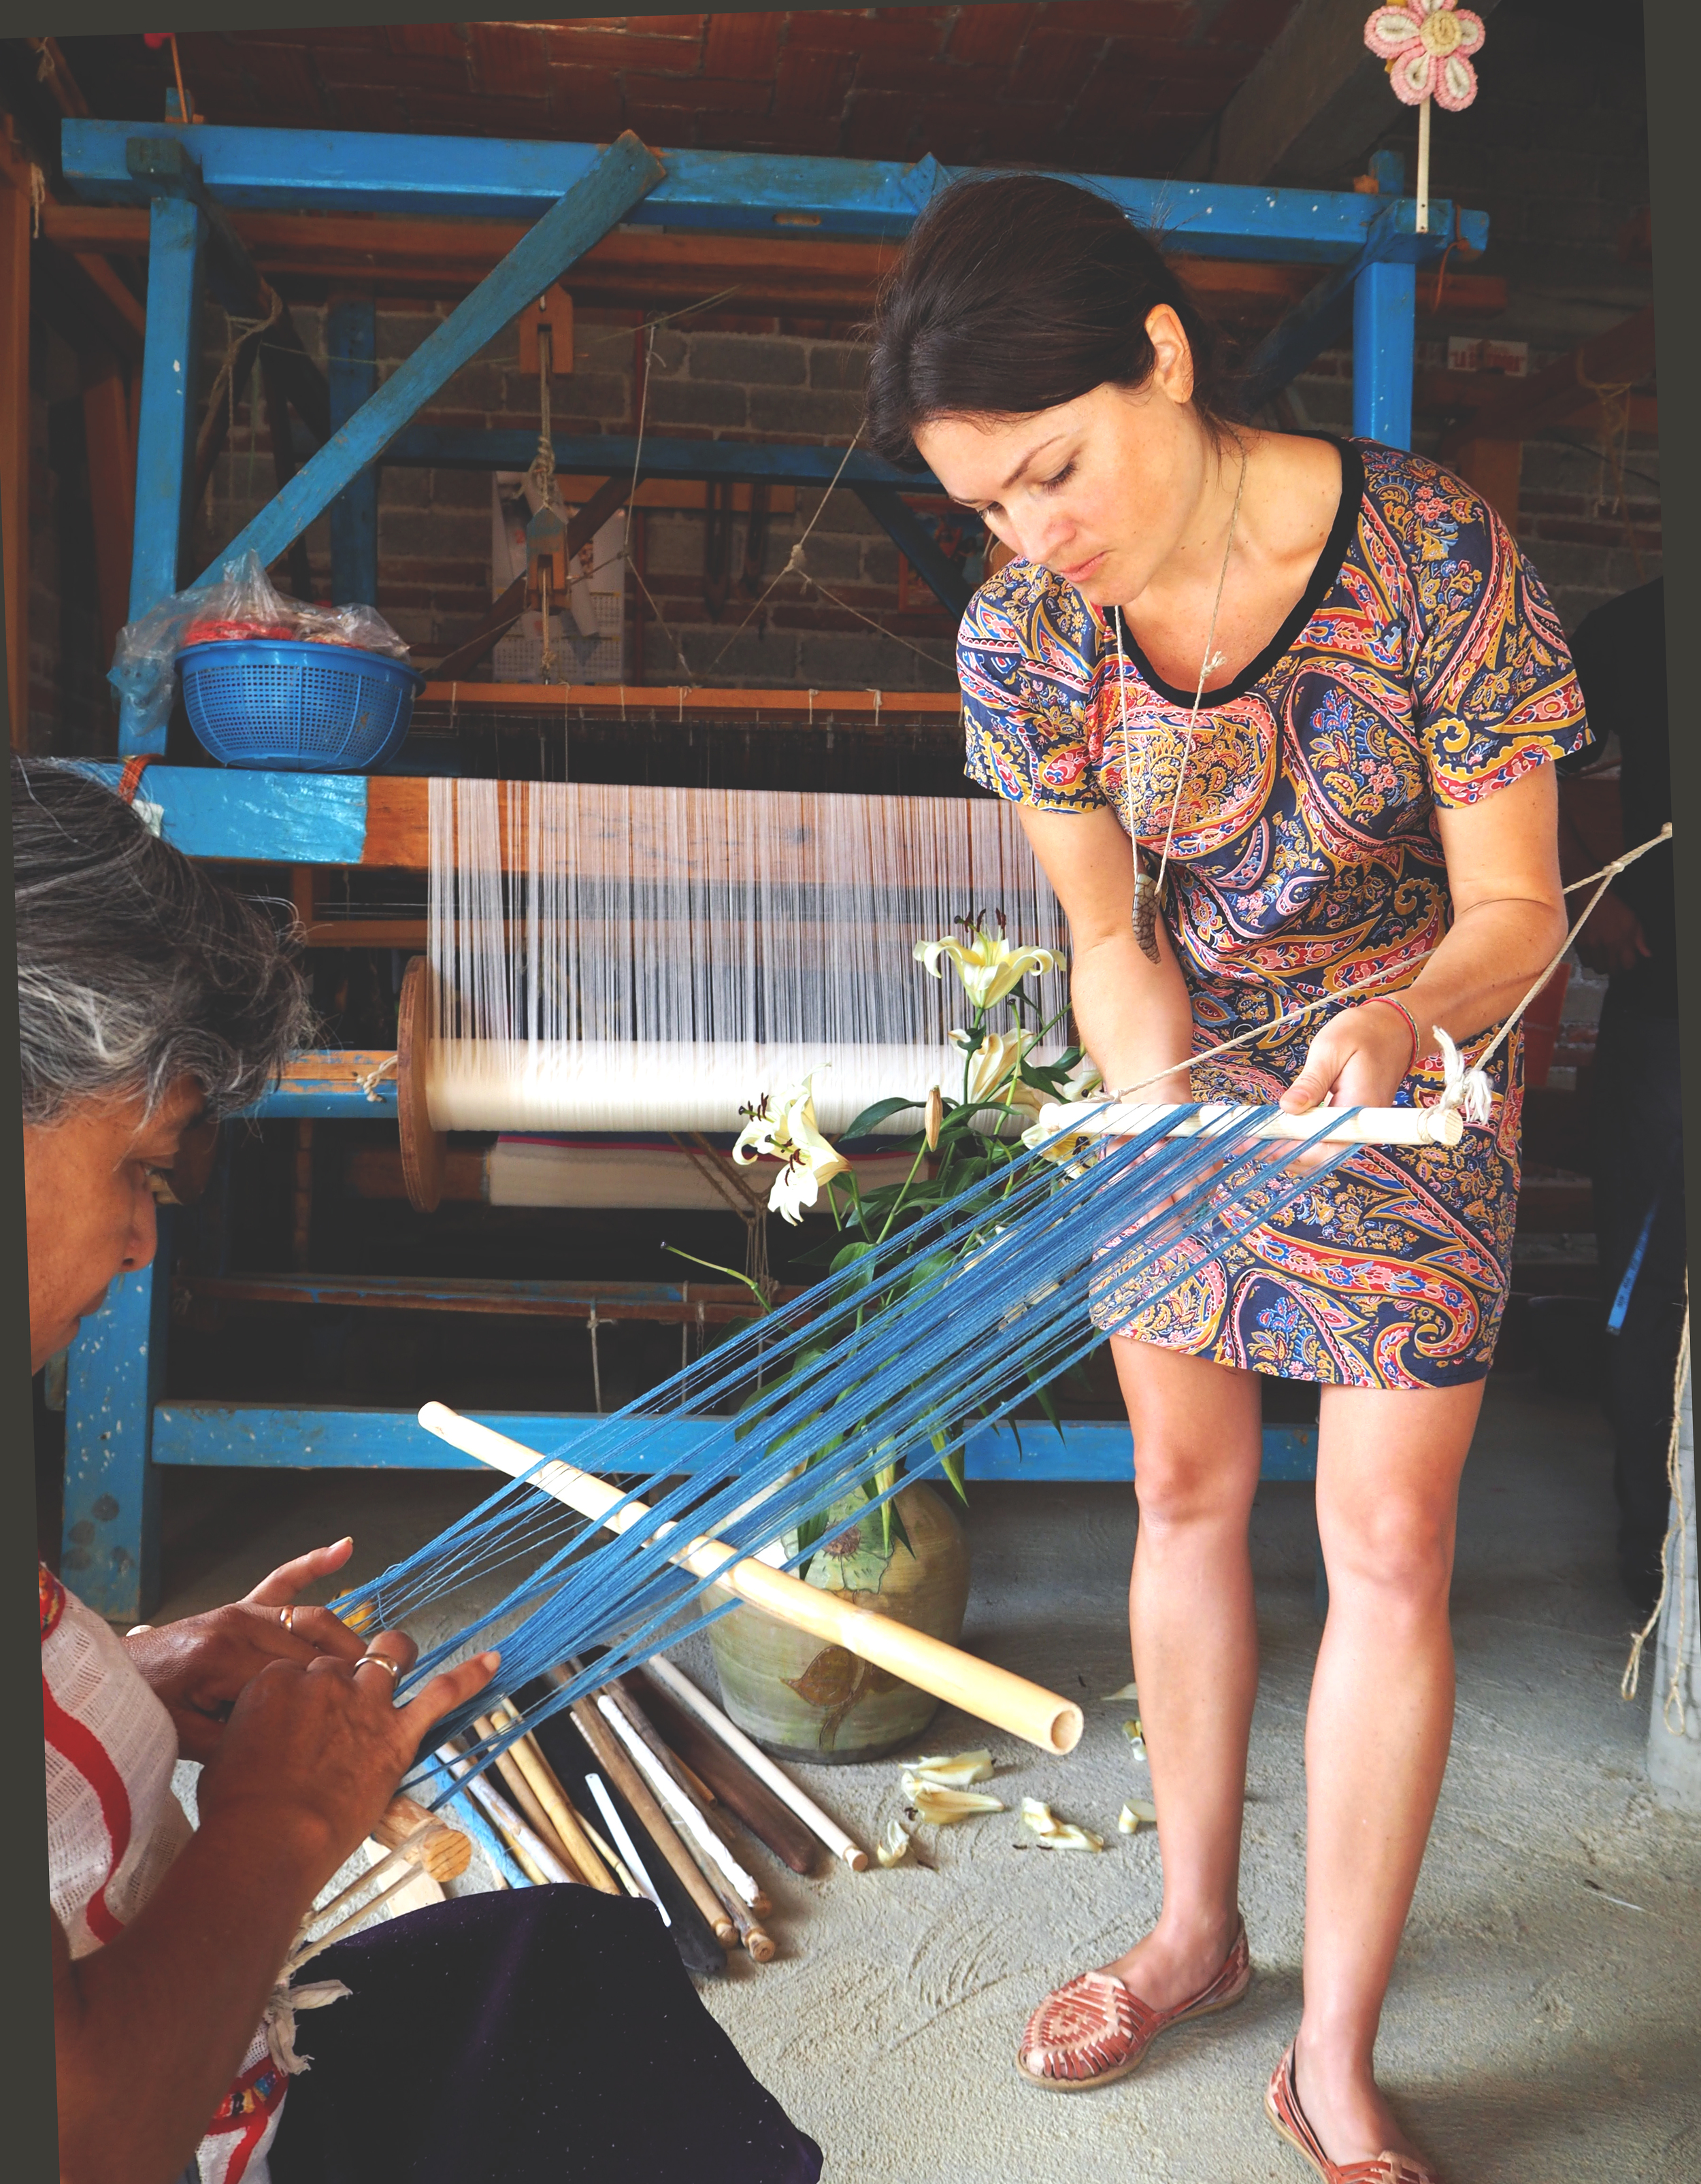 Warping the loom with indigo dyed cotton